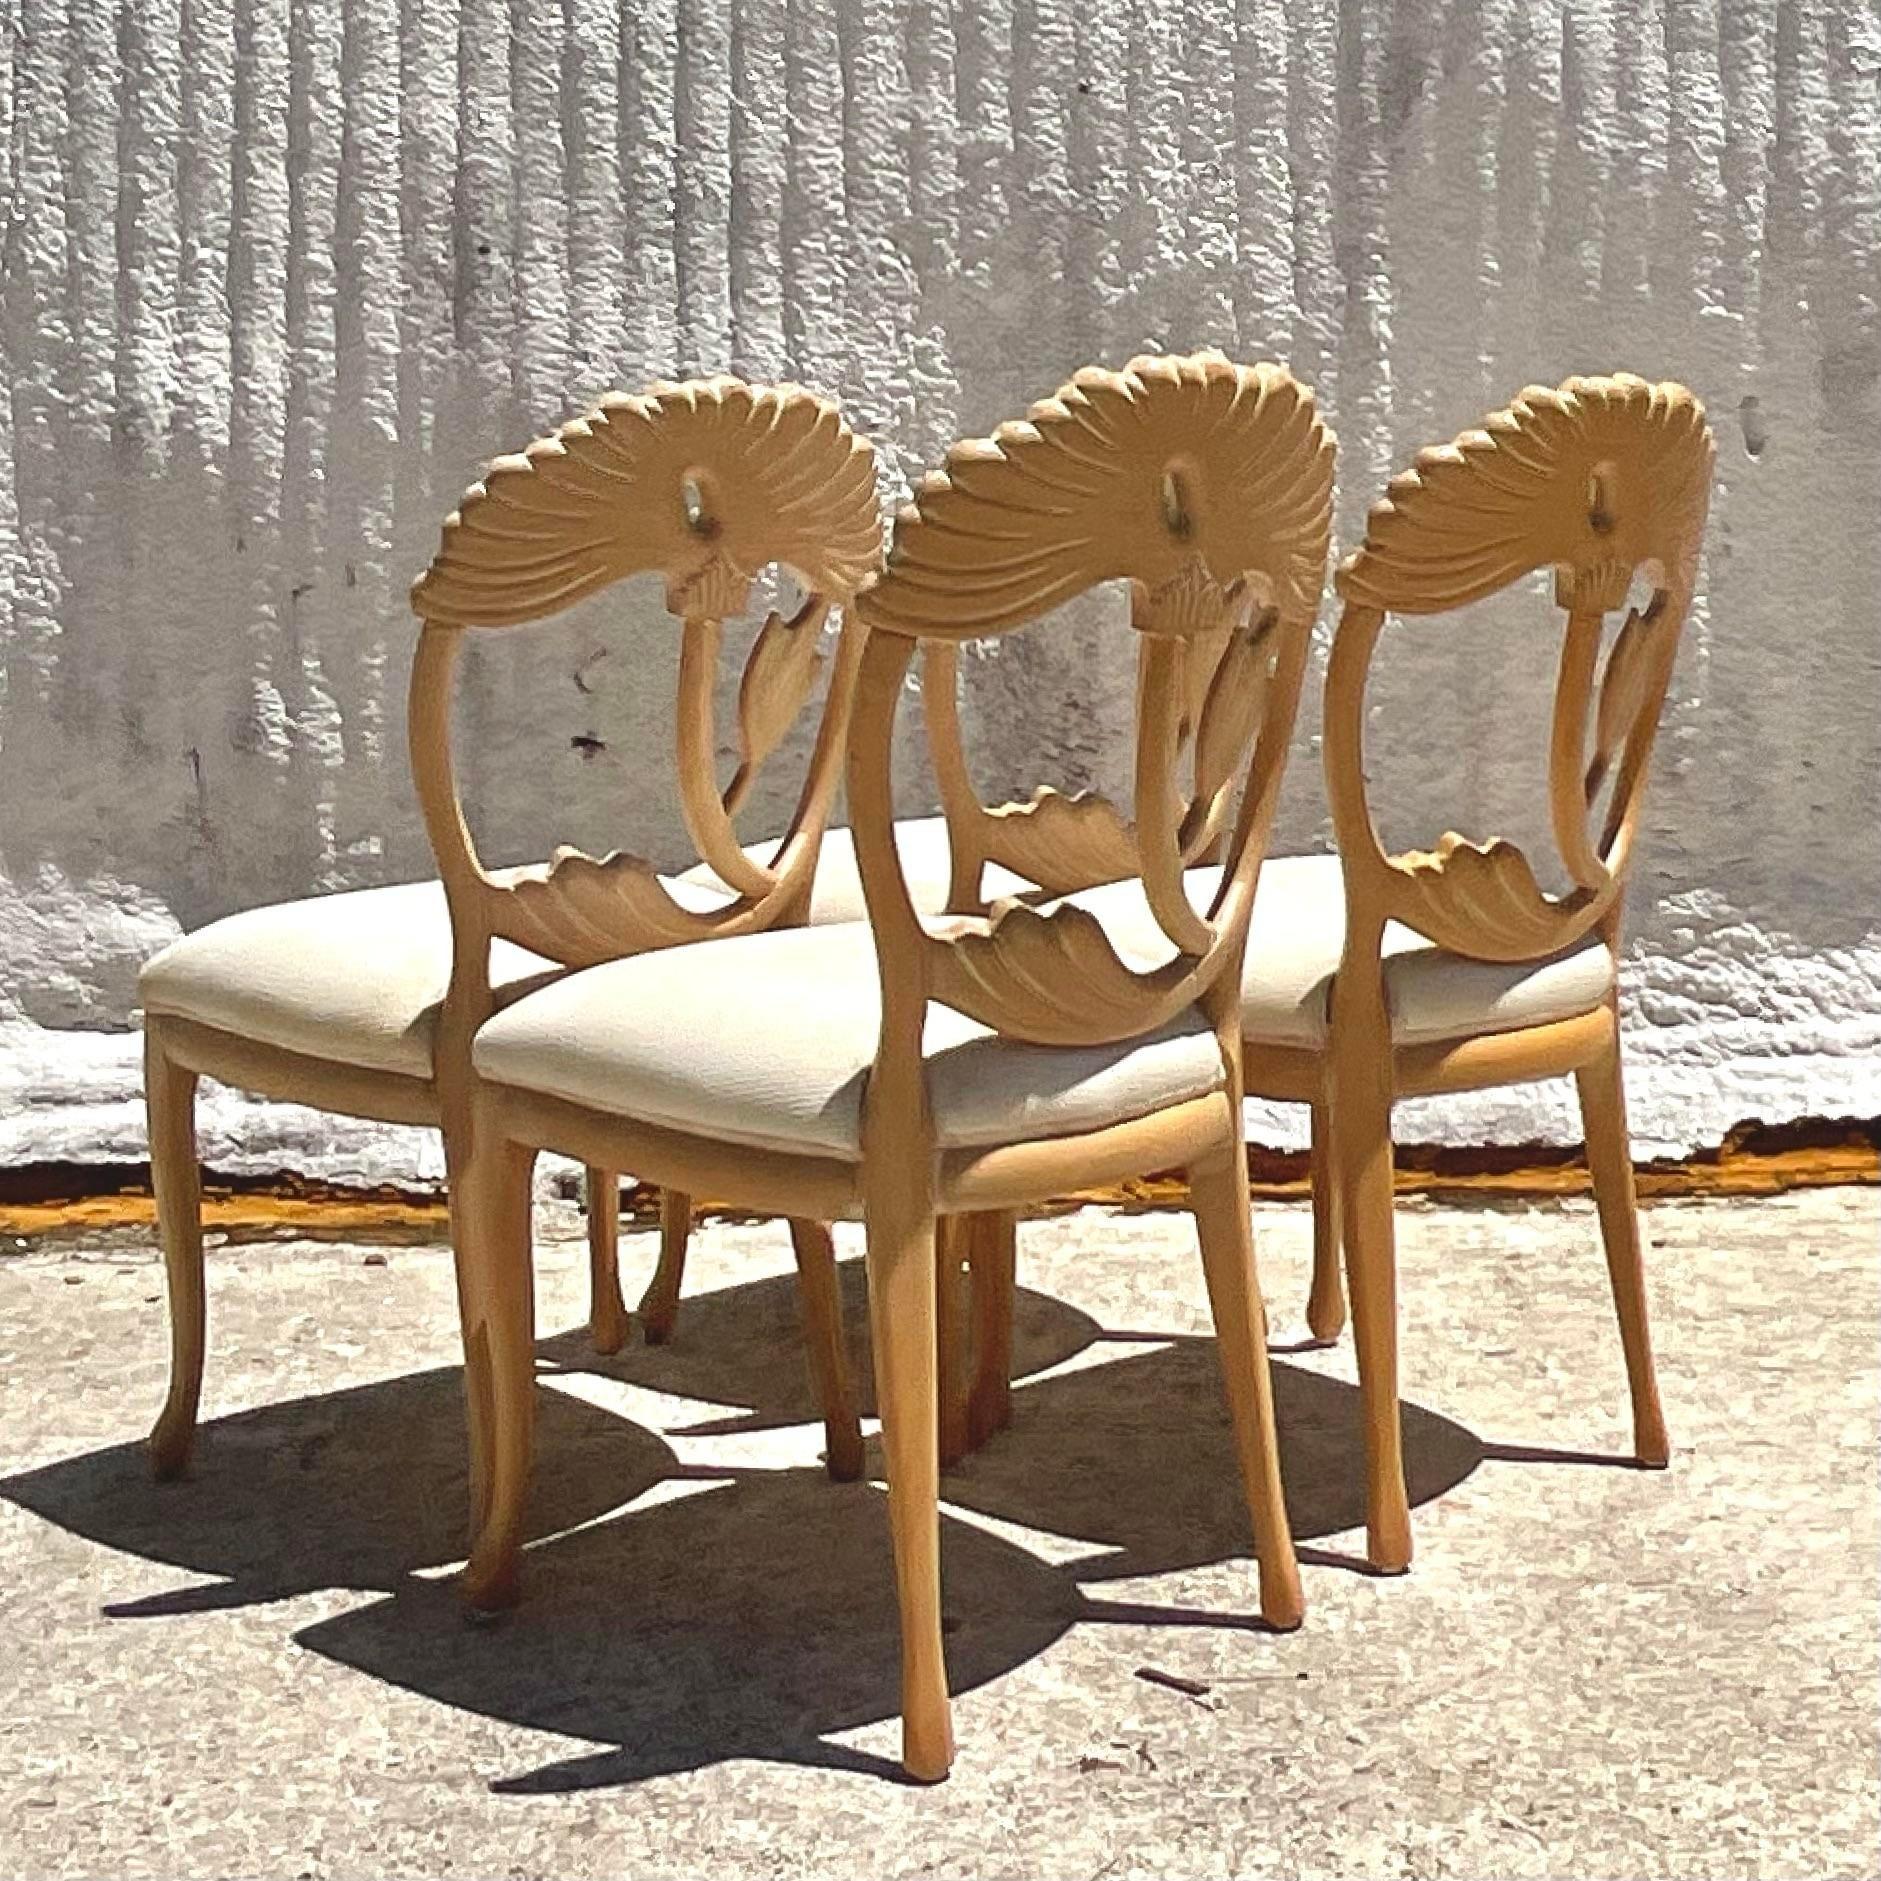 20th Century Vintage Boho Carved Lotus Blossom Dining Chairs - Set of 4